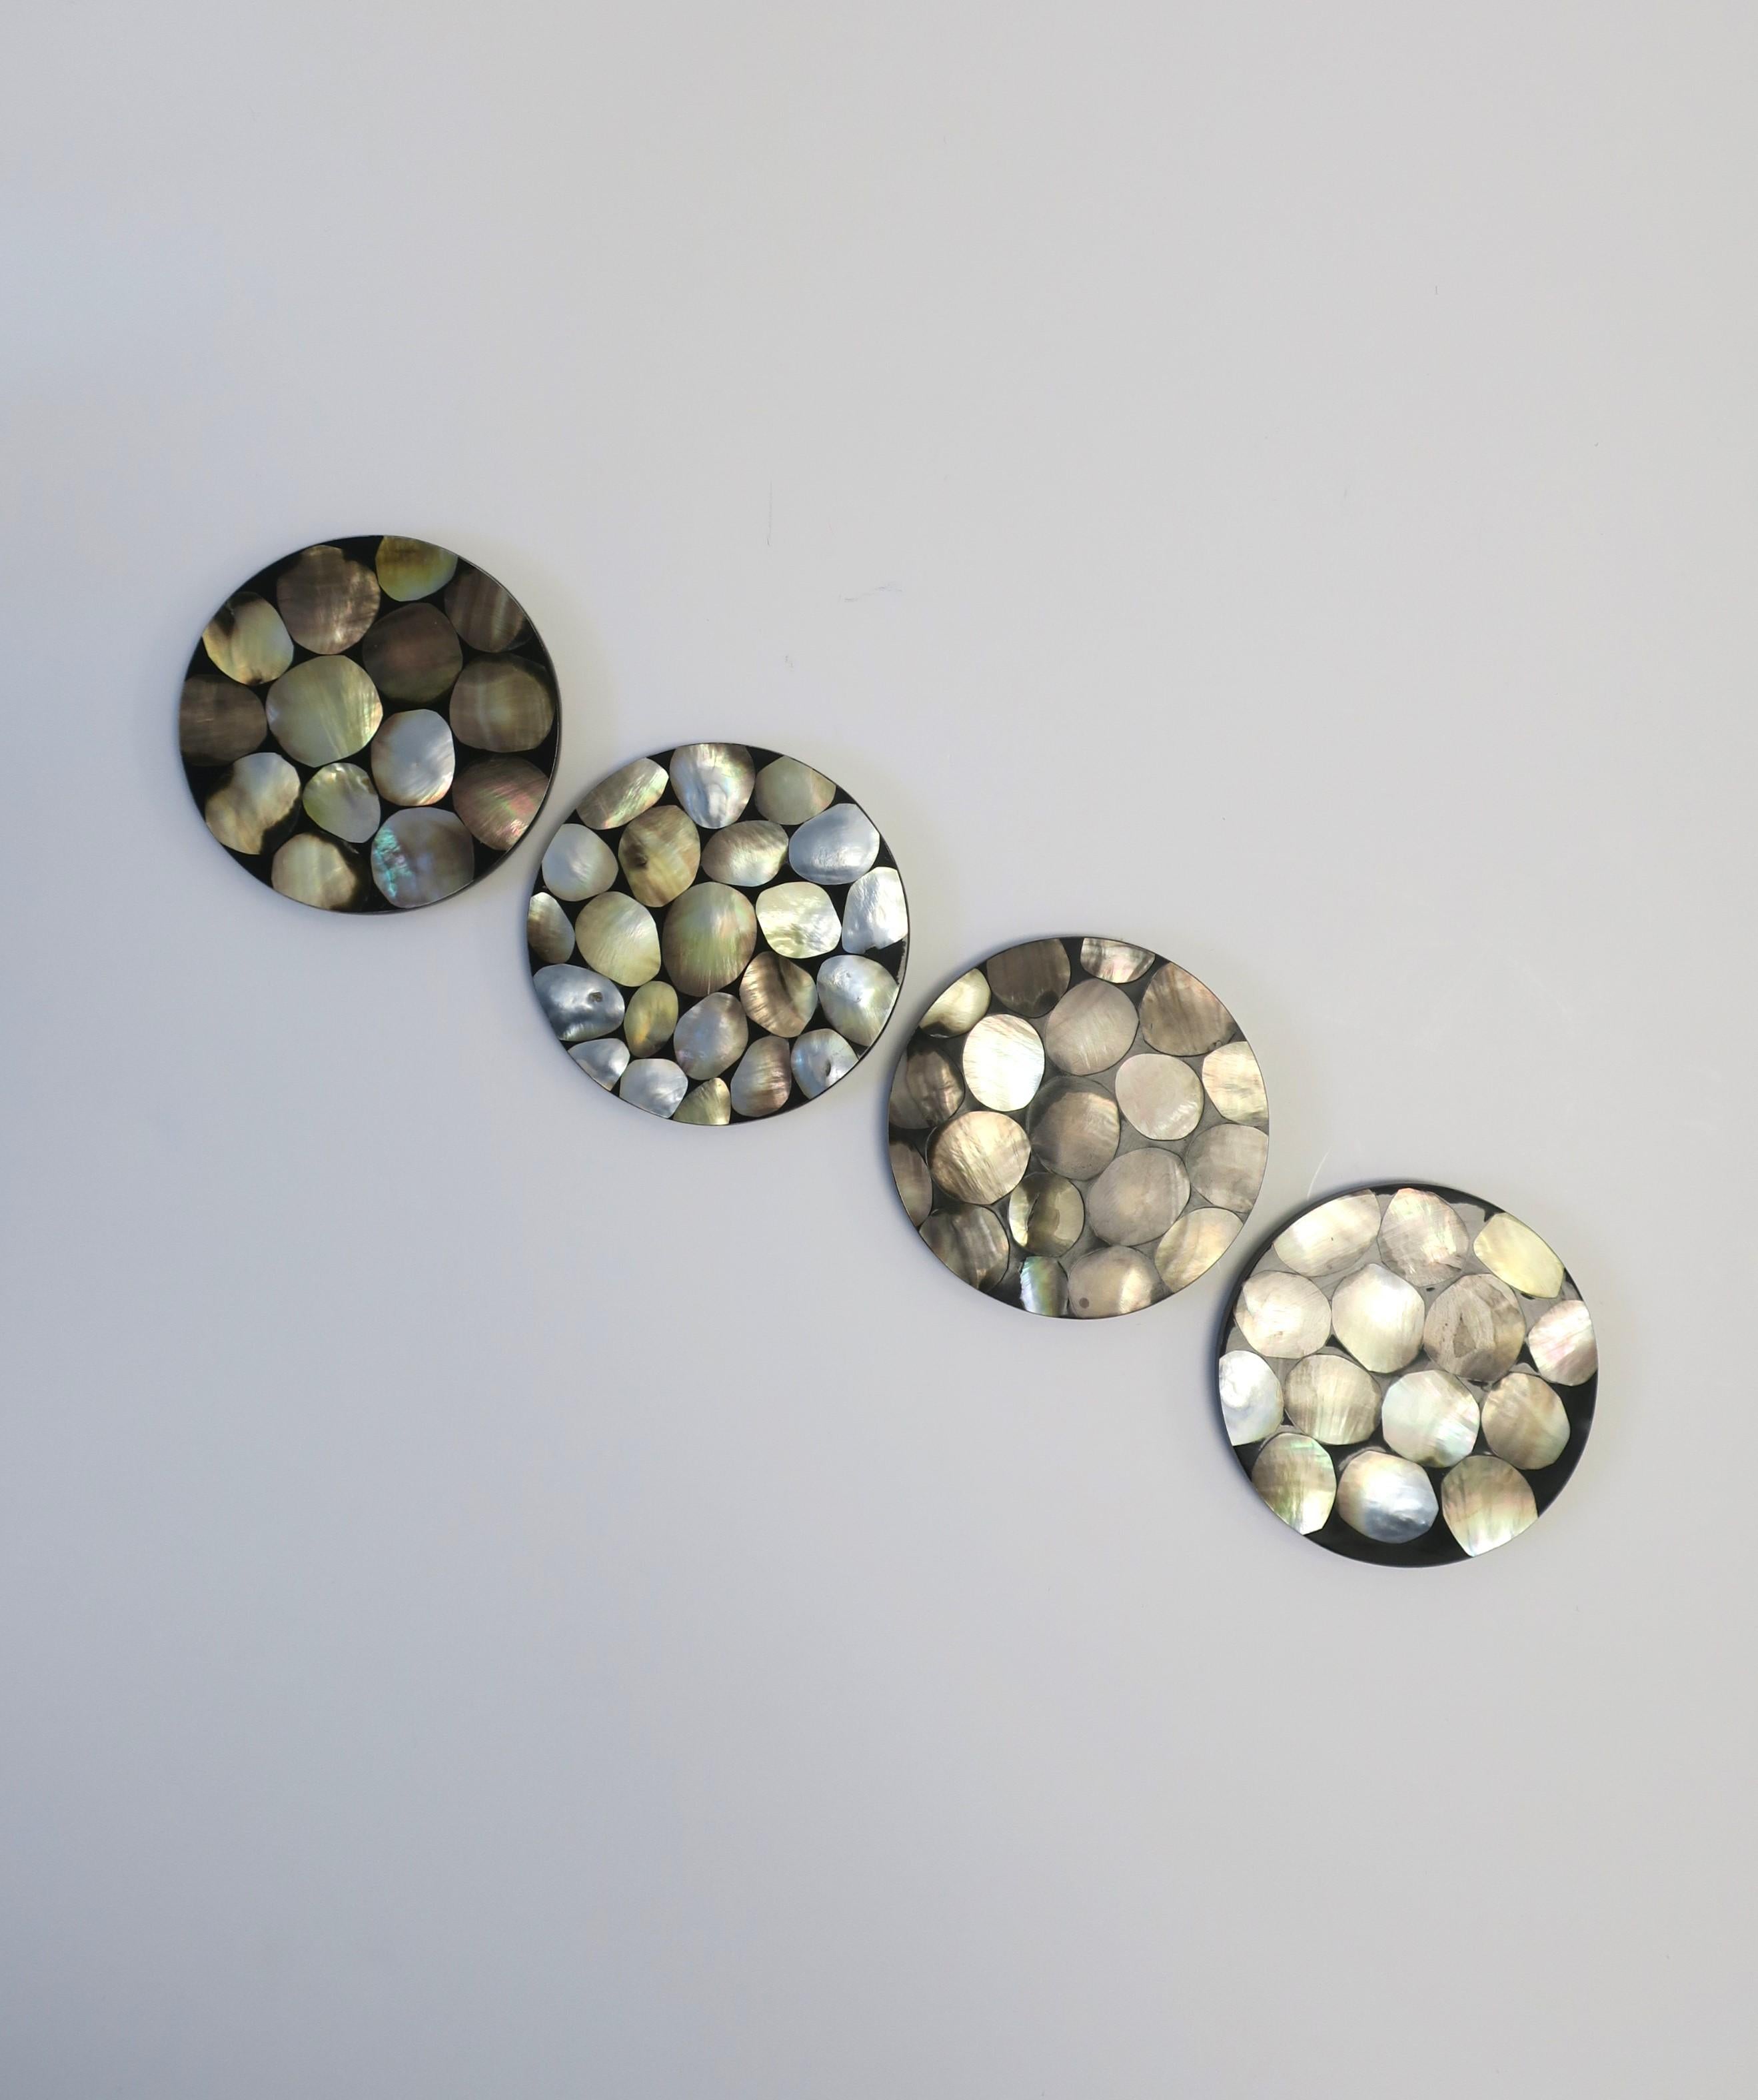 Philippin Abalone Seashell Cocktail Coasters by R & Y Augousti, Set of 4 (en anglais) en vente